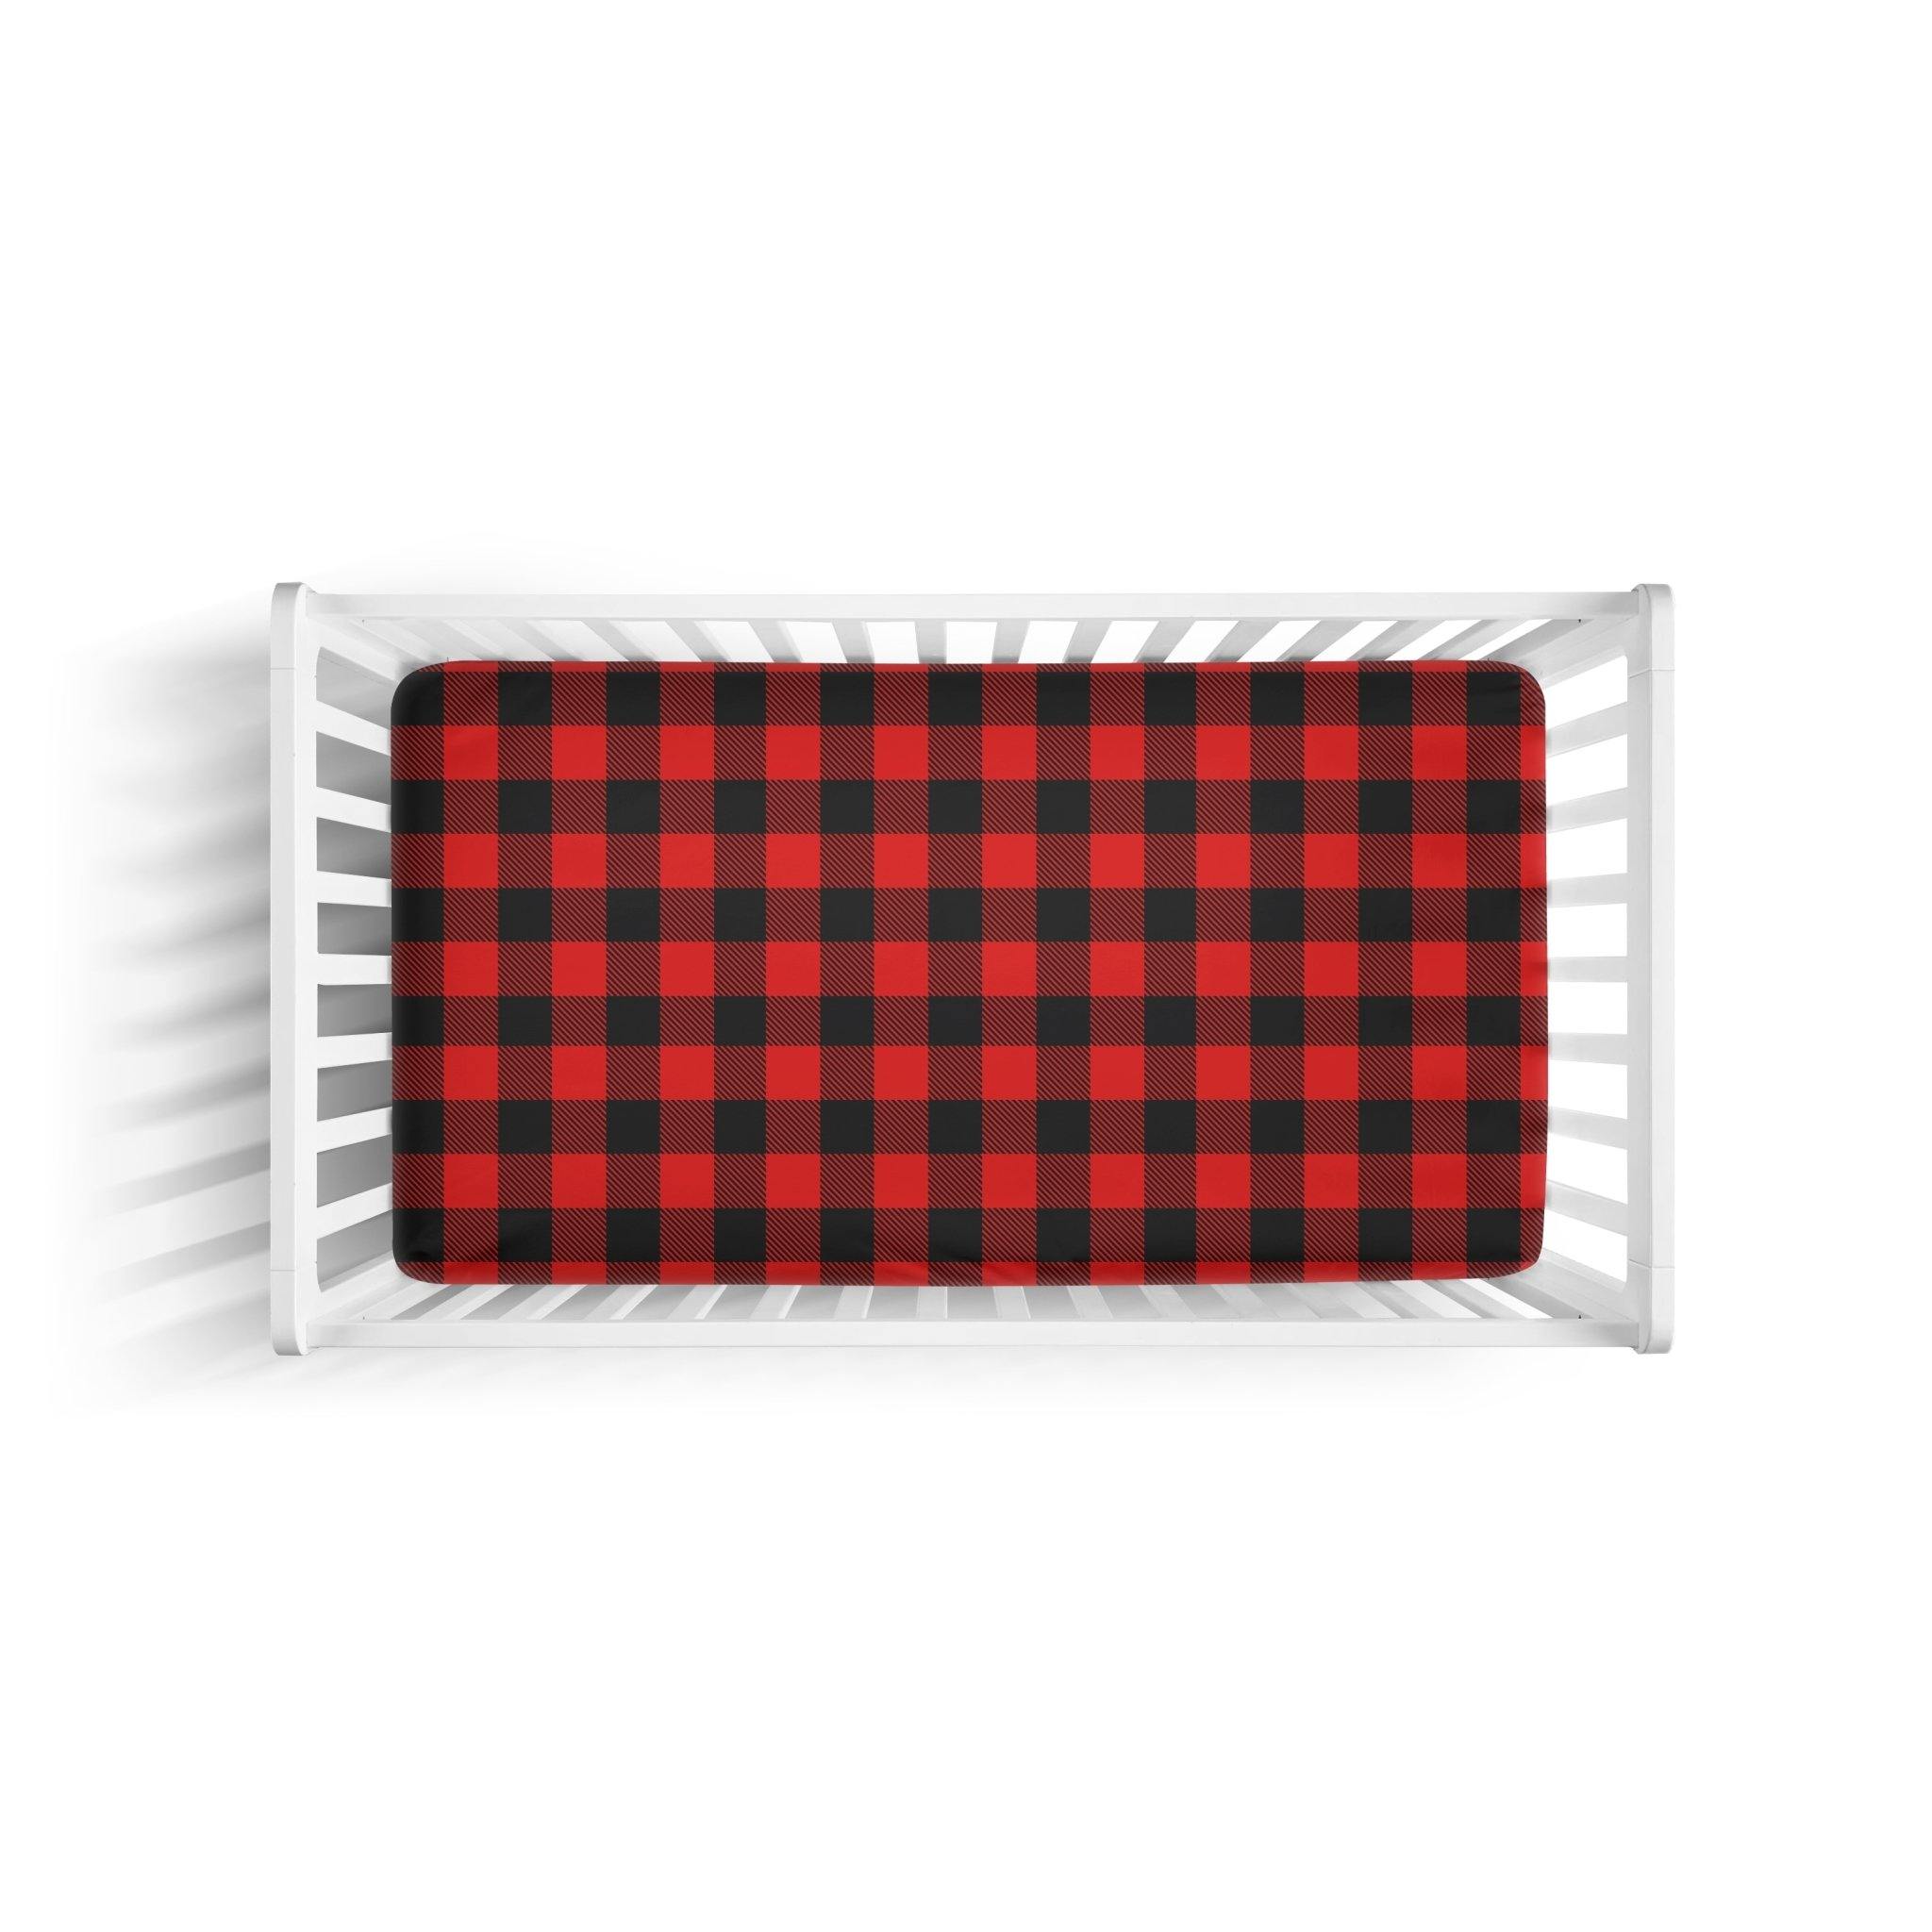 Fitted Crib Sheet in Red and Black Buffalo Plaid Print